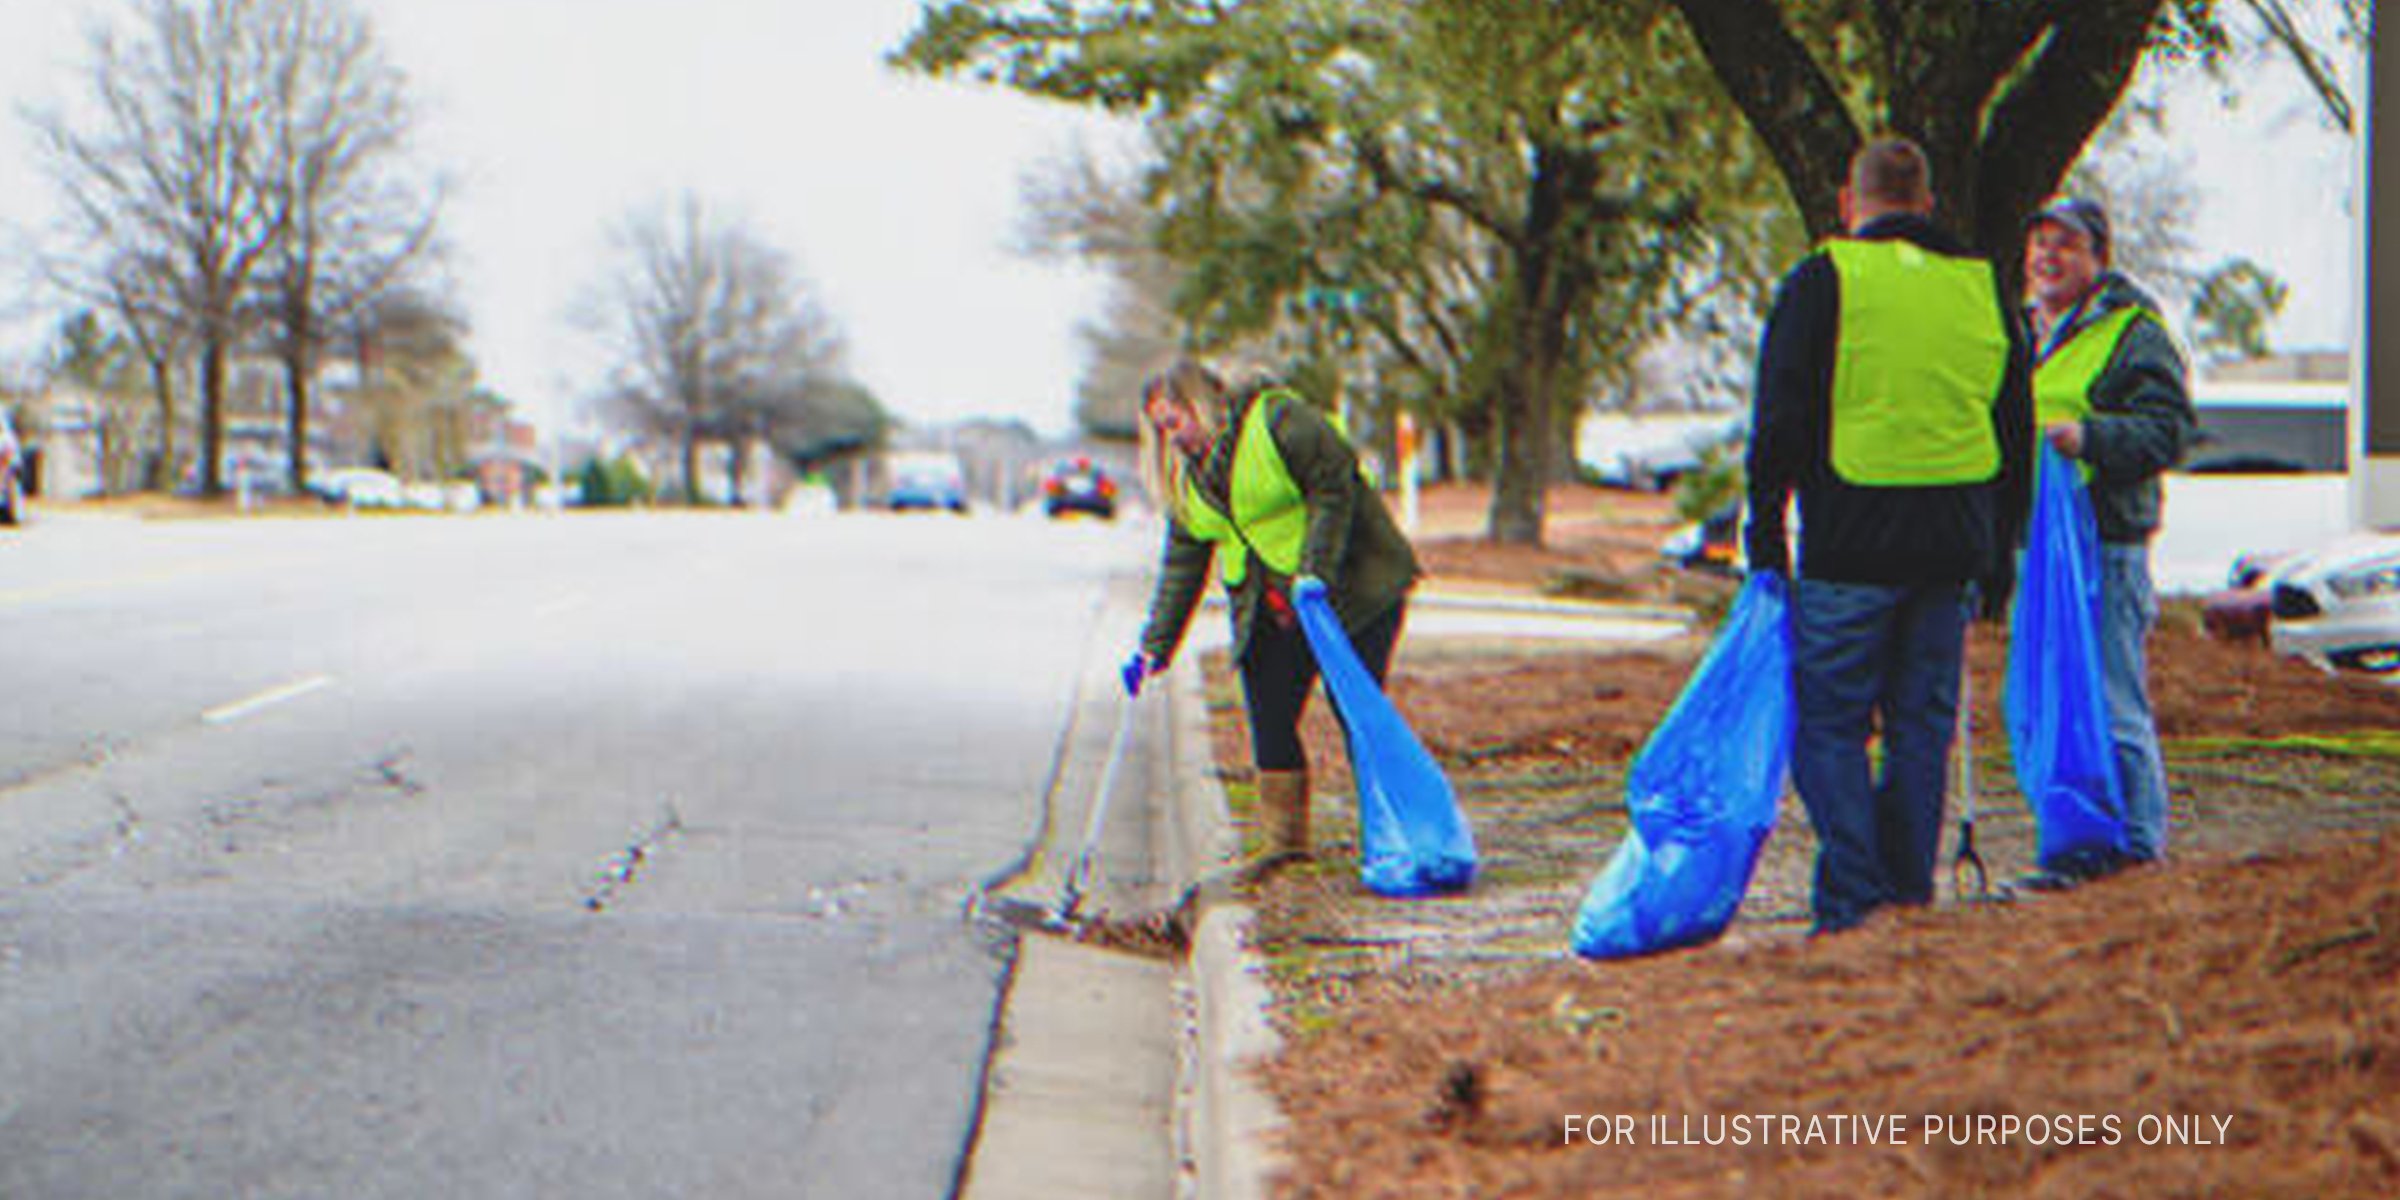 People in janitorial outfit cleaning the street | Flickr / Greenville, NC (Public Domain)